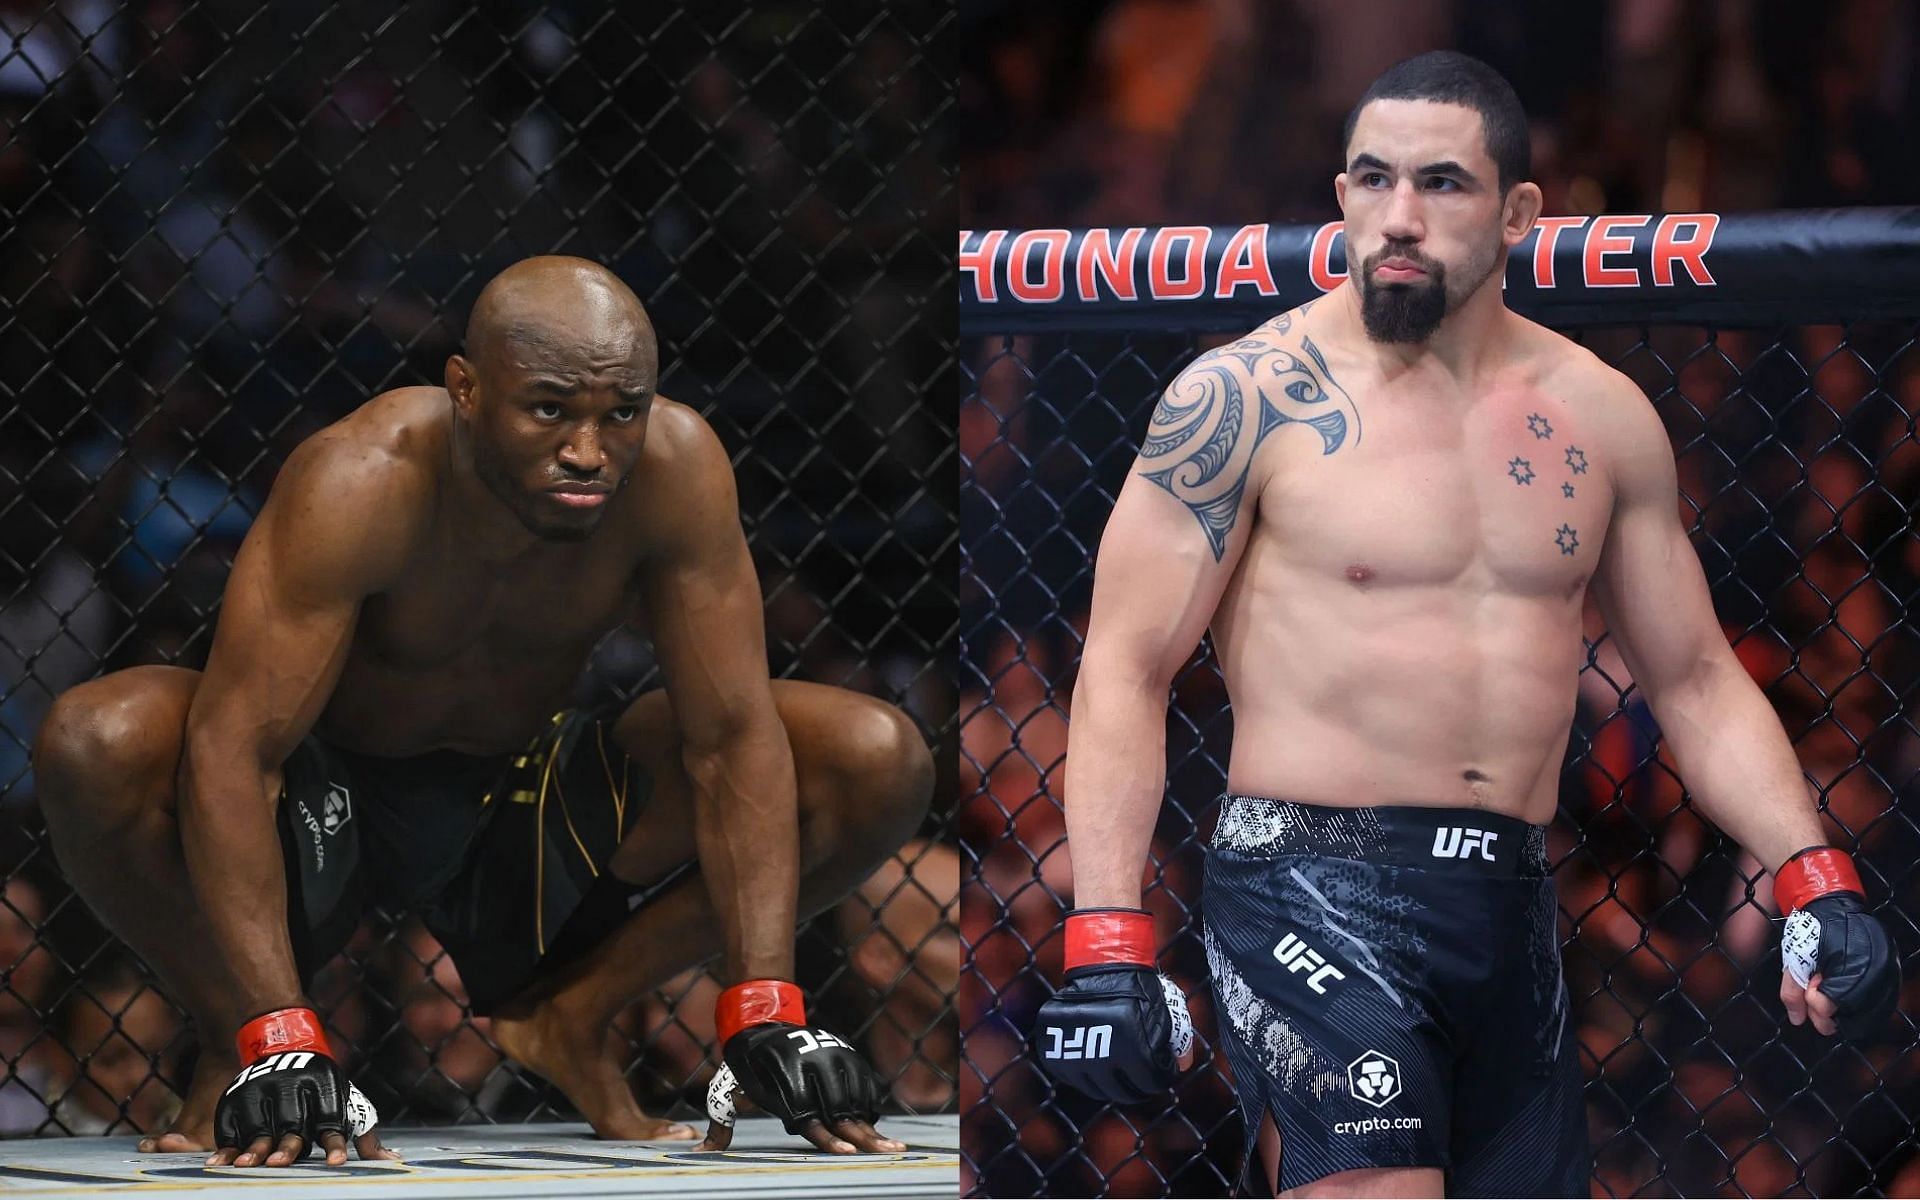 Kamaru Usman (left) agreed to fight Robert Whittaker (right) in UFC Saudi Arabia main event, according to his manager [Images courtesy: Getty Images]